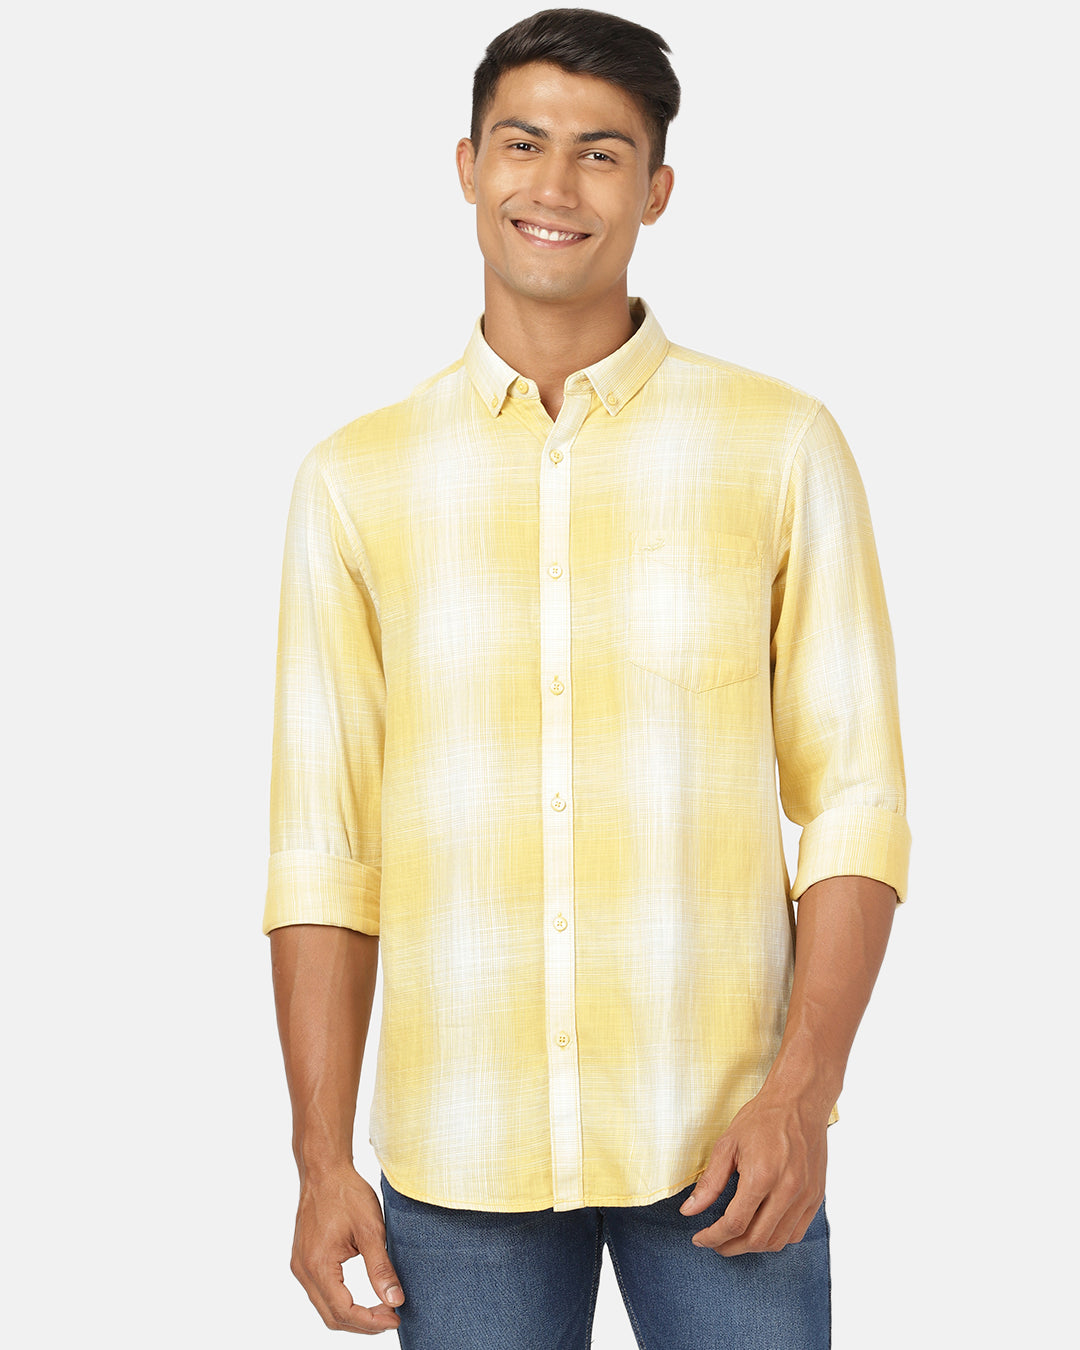 Crocodile Casual Full Sleeve Comfort Fit Checks Yellow with Collar Shirt for Men